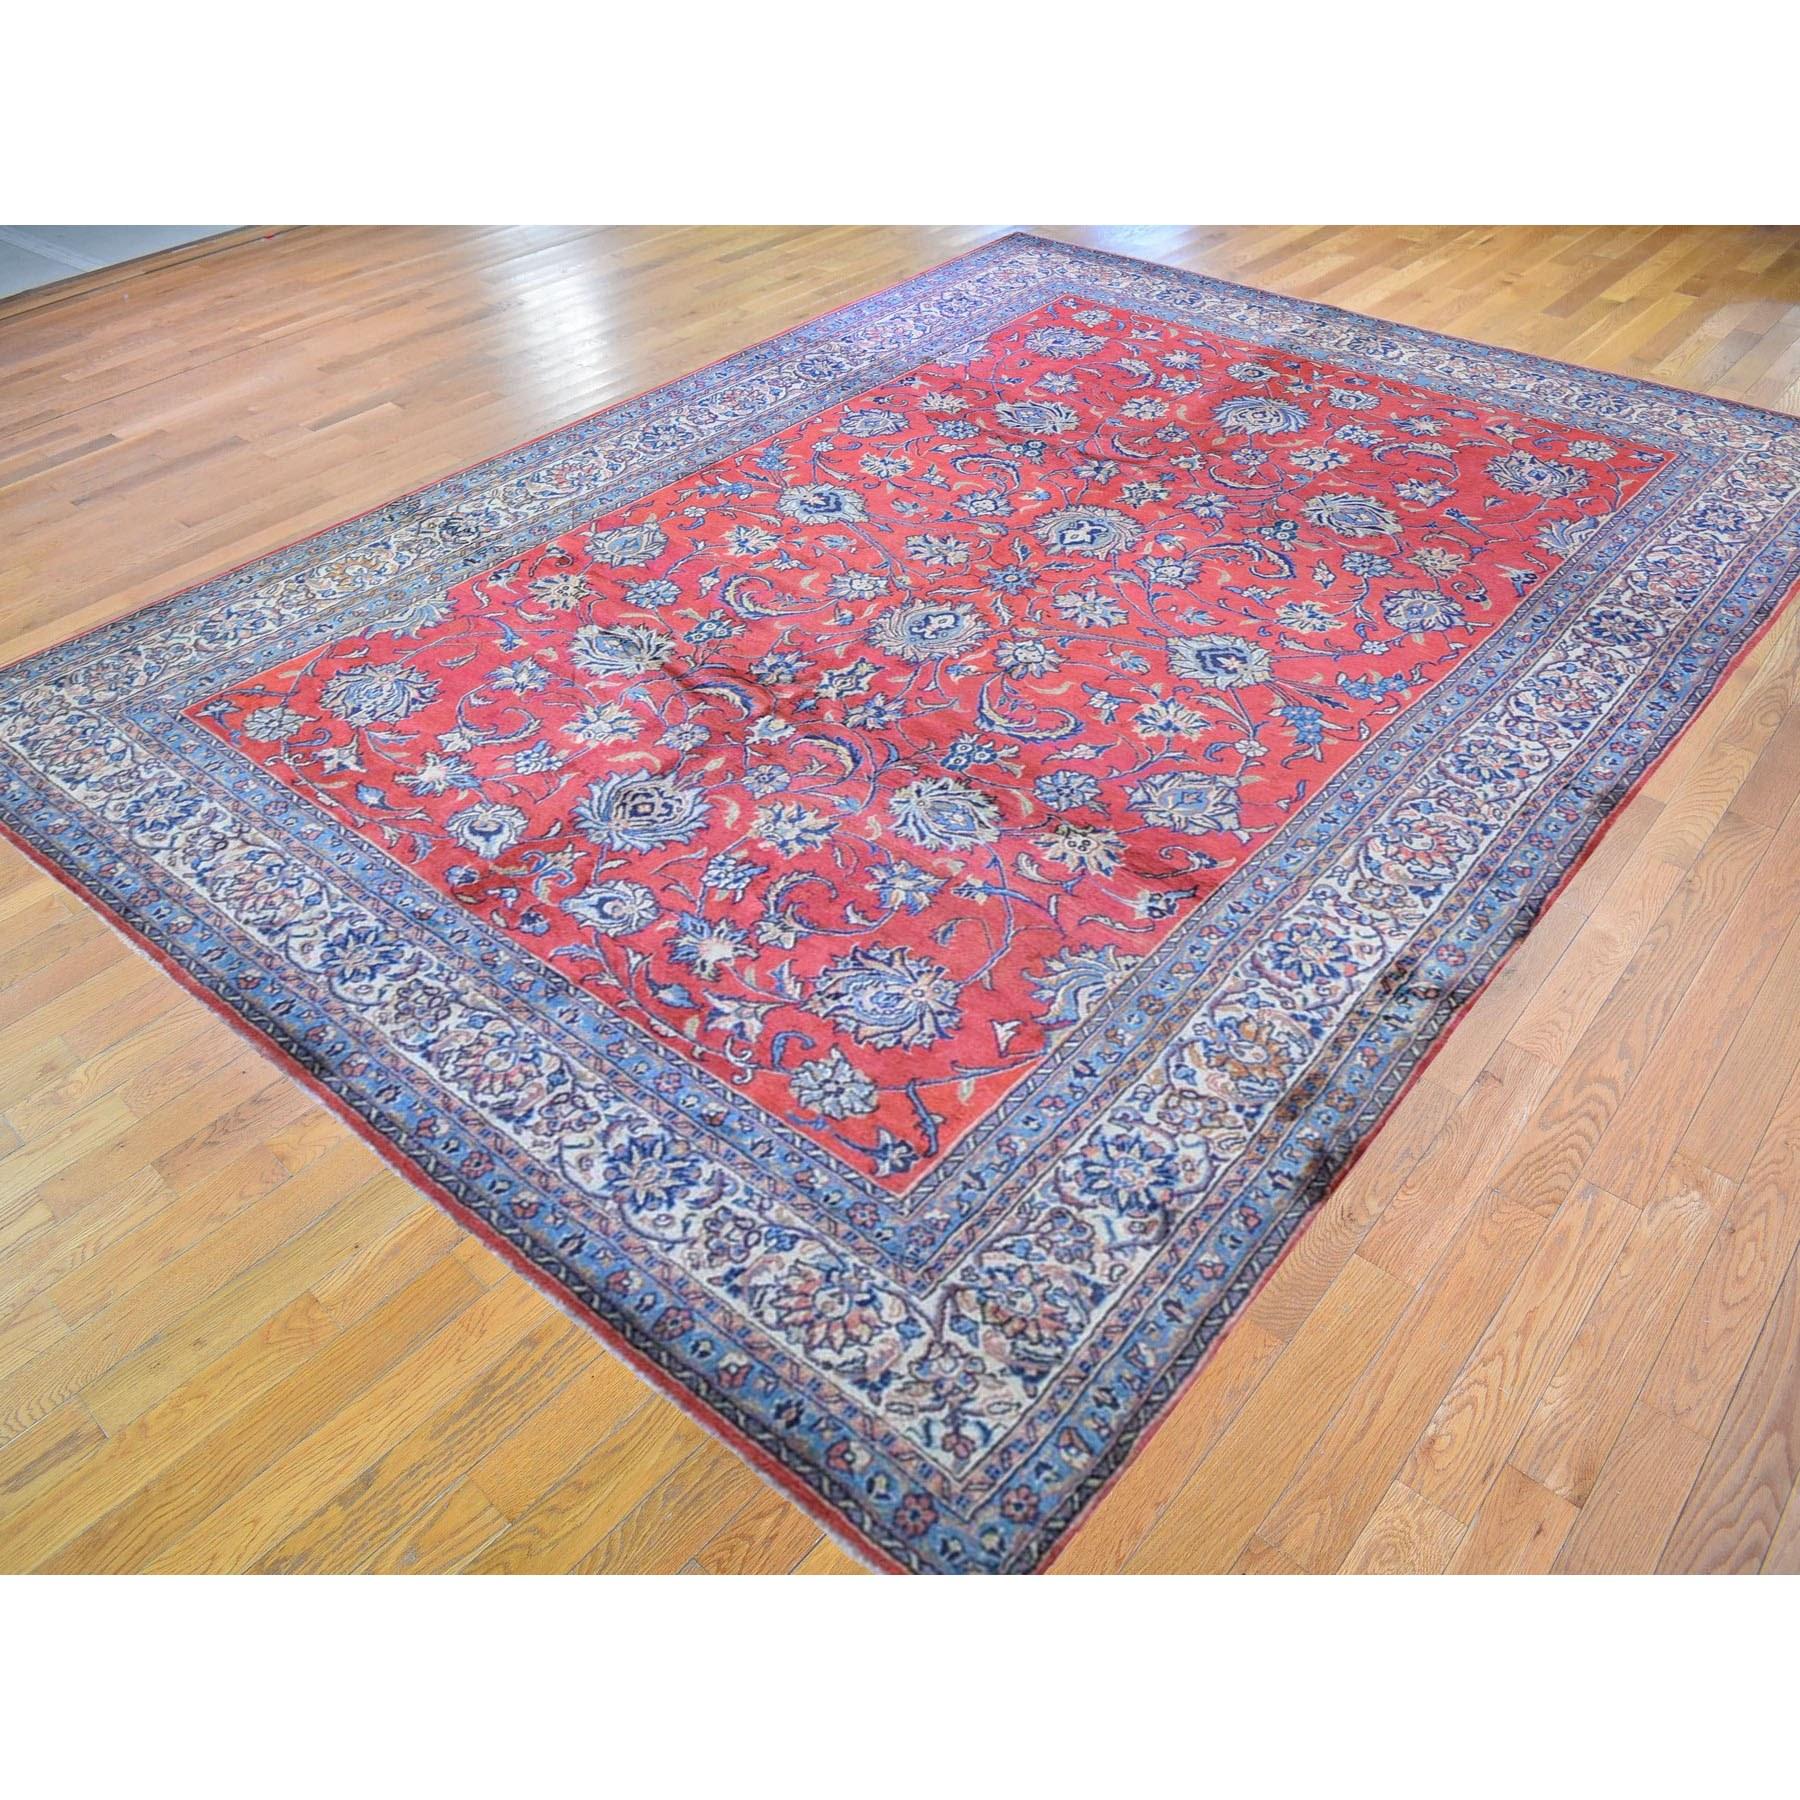 Medieval Vintage Persian Mahal Excellent Condition Persimmon Color Wool Hand Knotted Rug